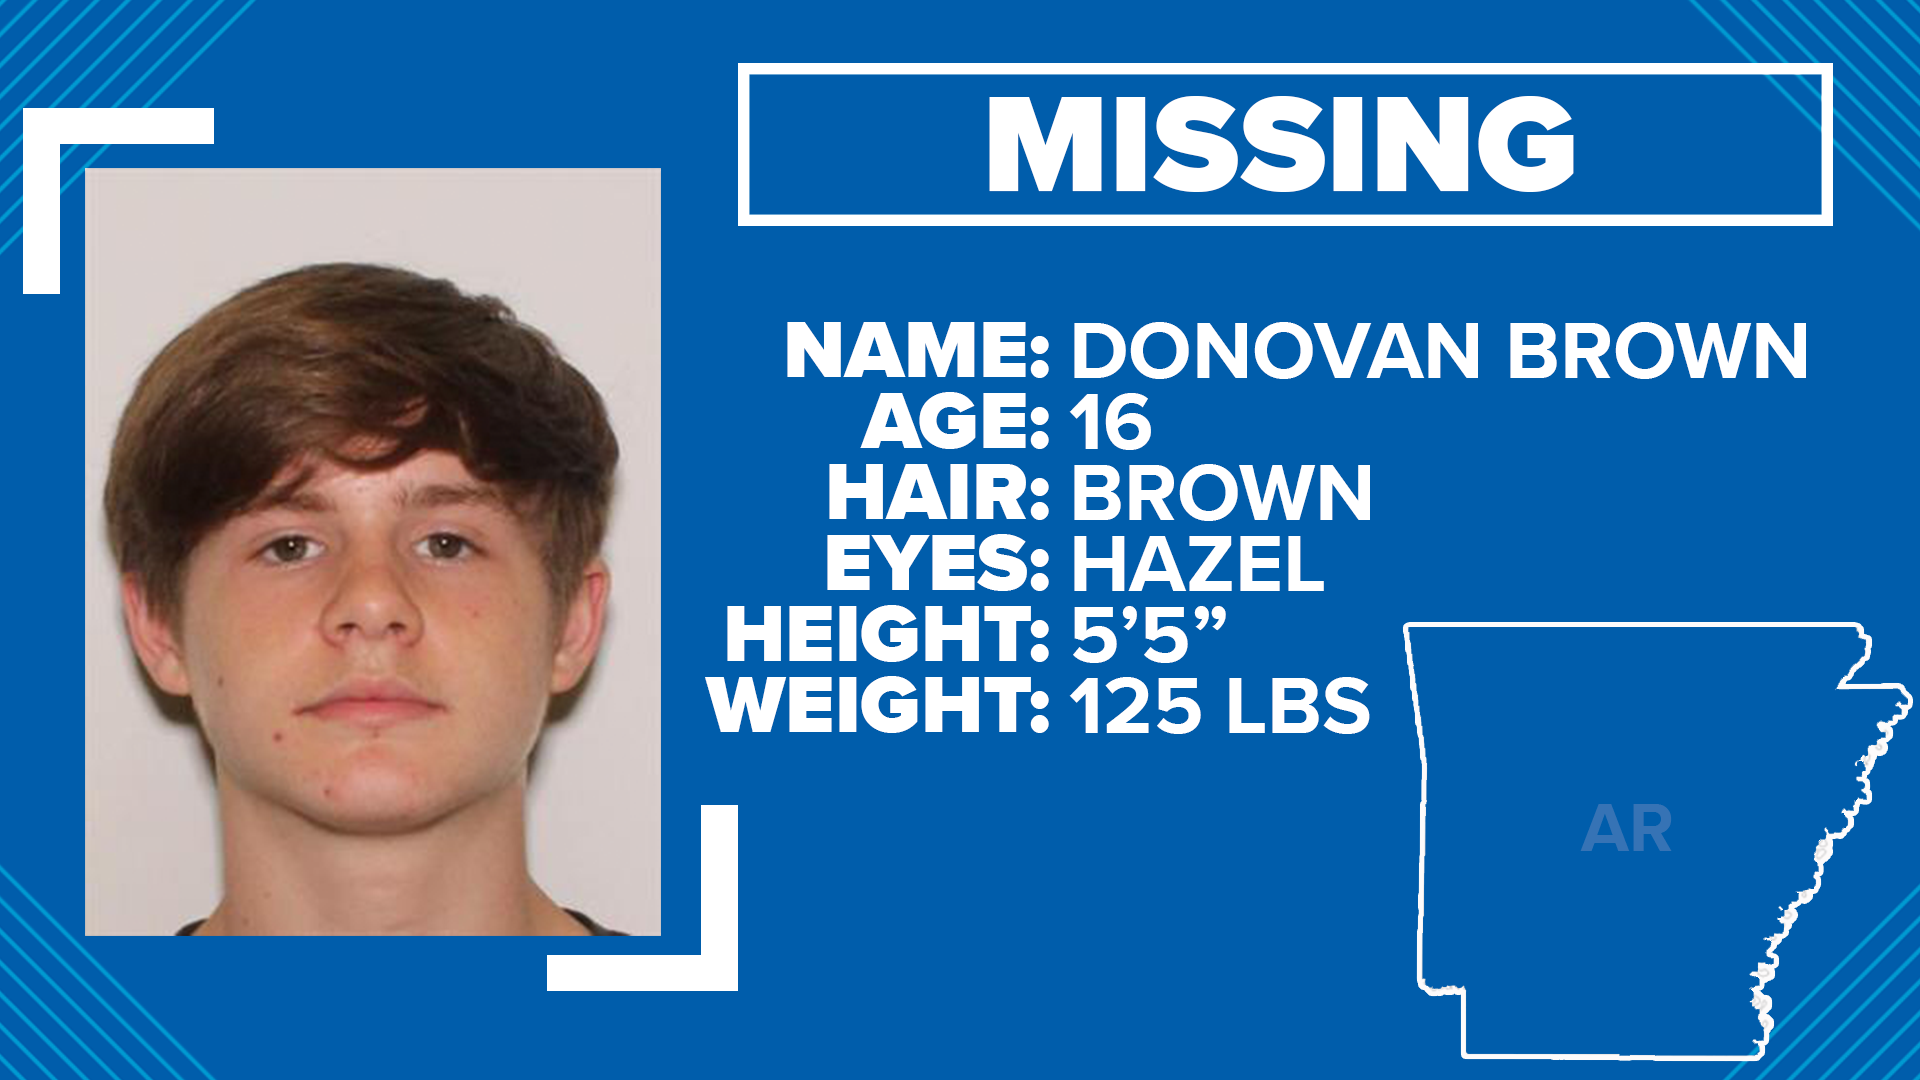 The Garland County Sheriff's Office is searching for a missing 16-year-old male